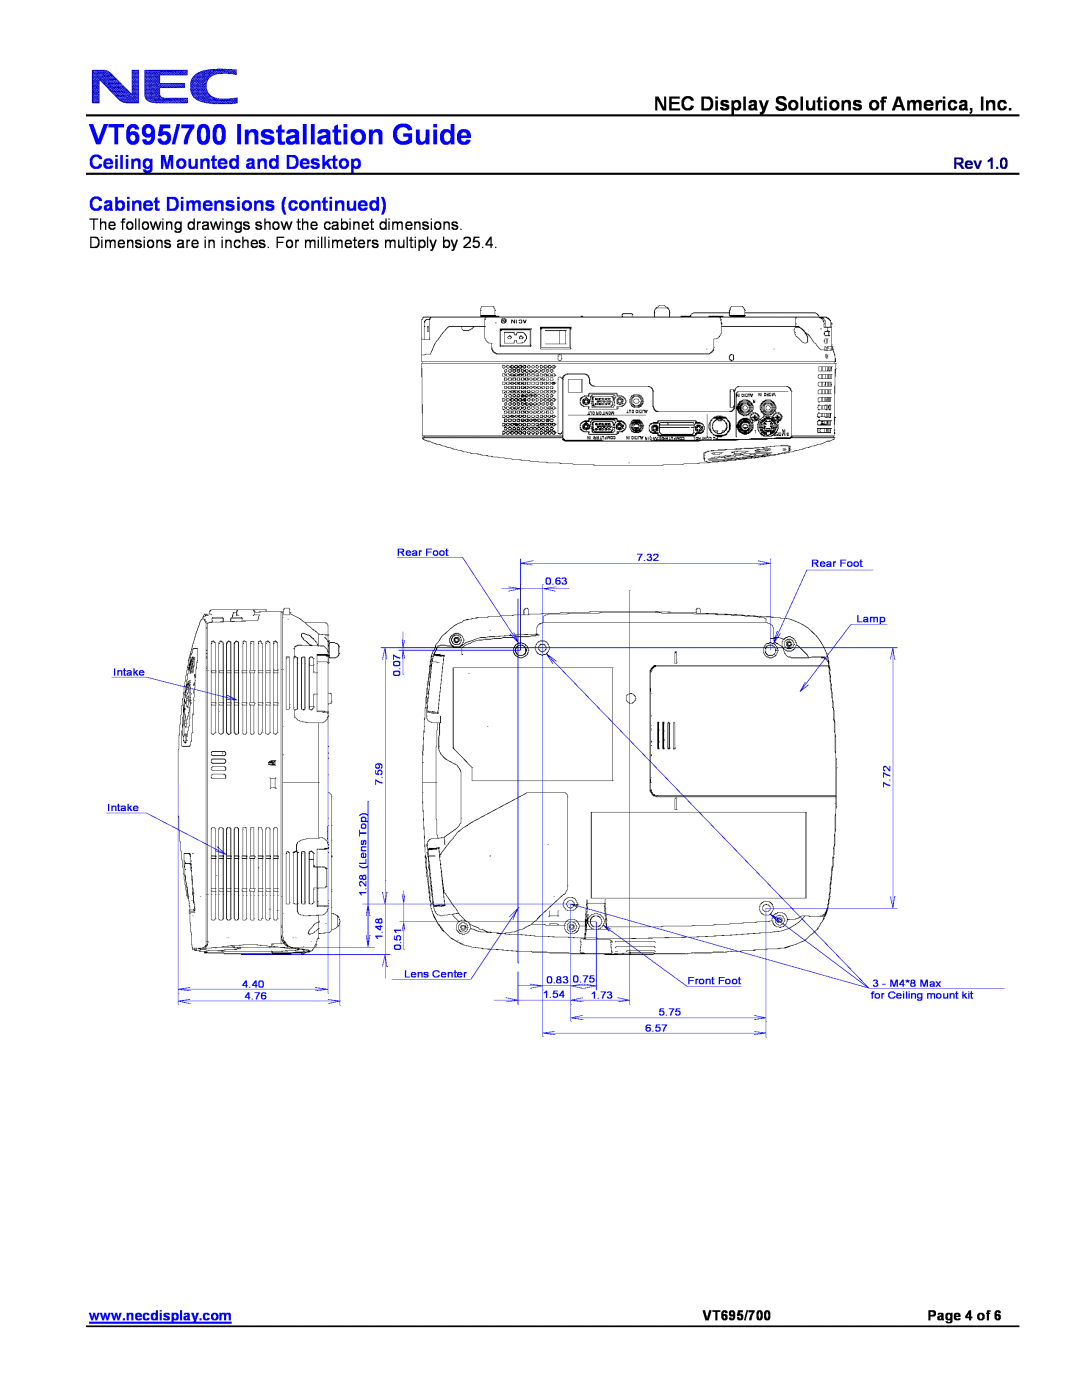 NEC Cabinet Dimensions continued, VT695/700 Installation Guide, NEC Display Solutions of America, Inc, Page 4 of, 0.07 